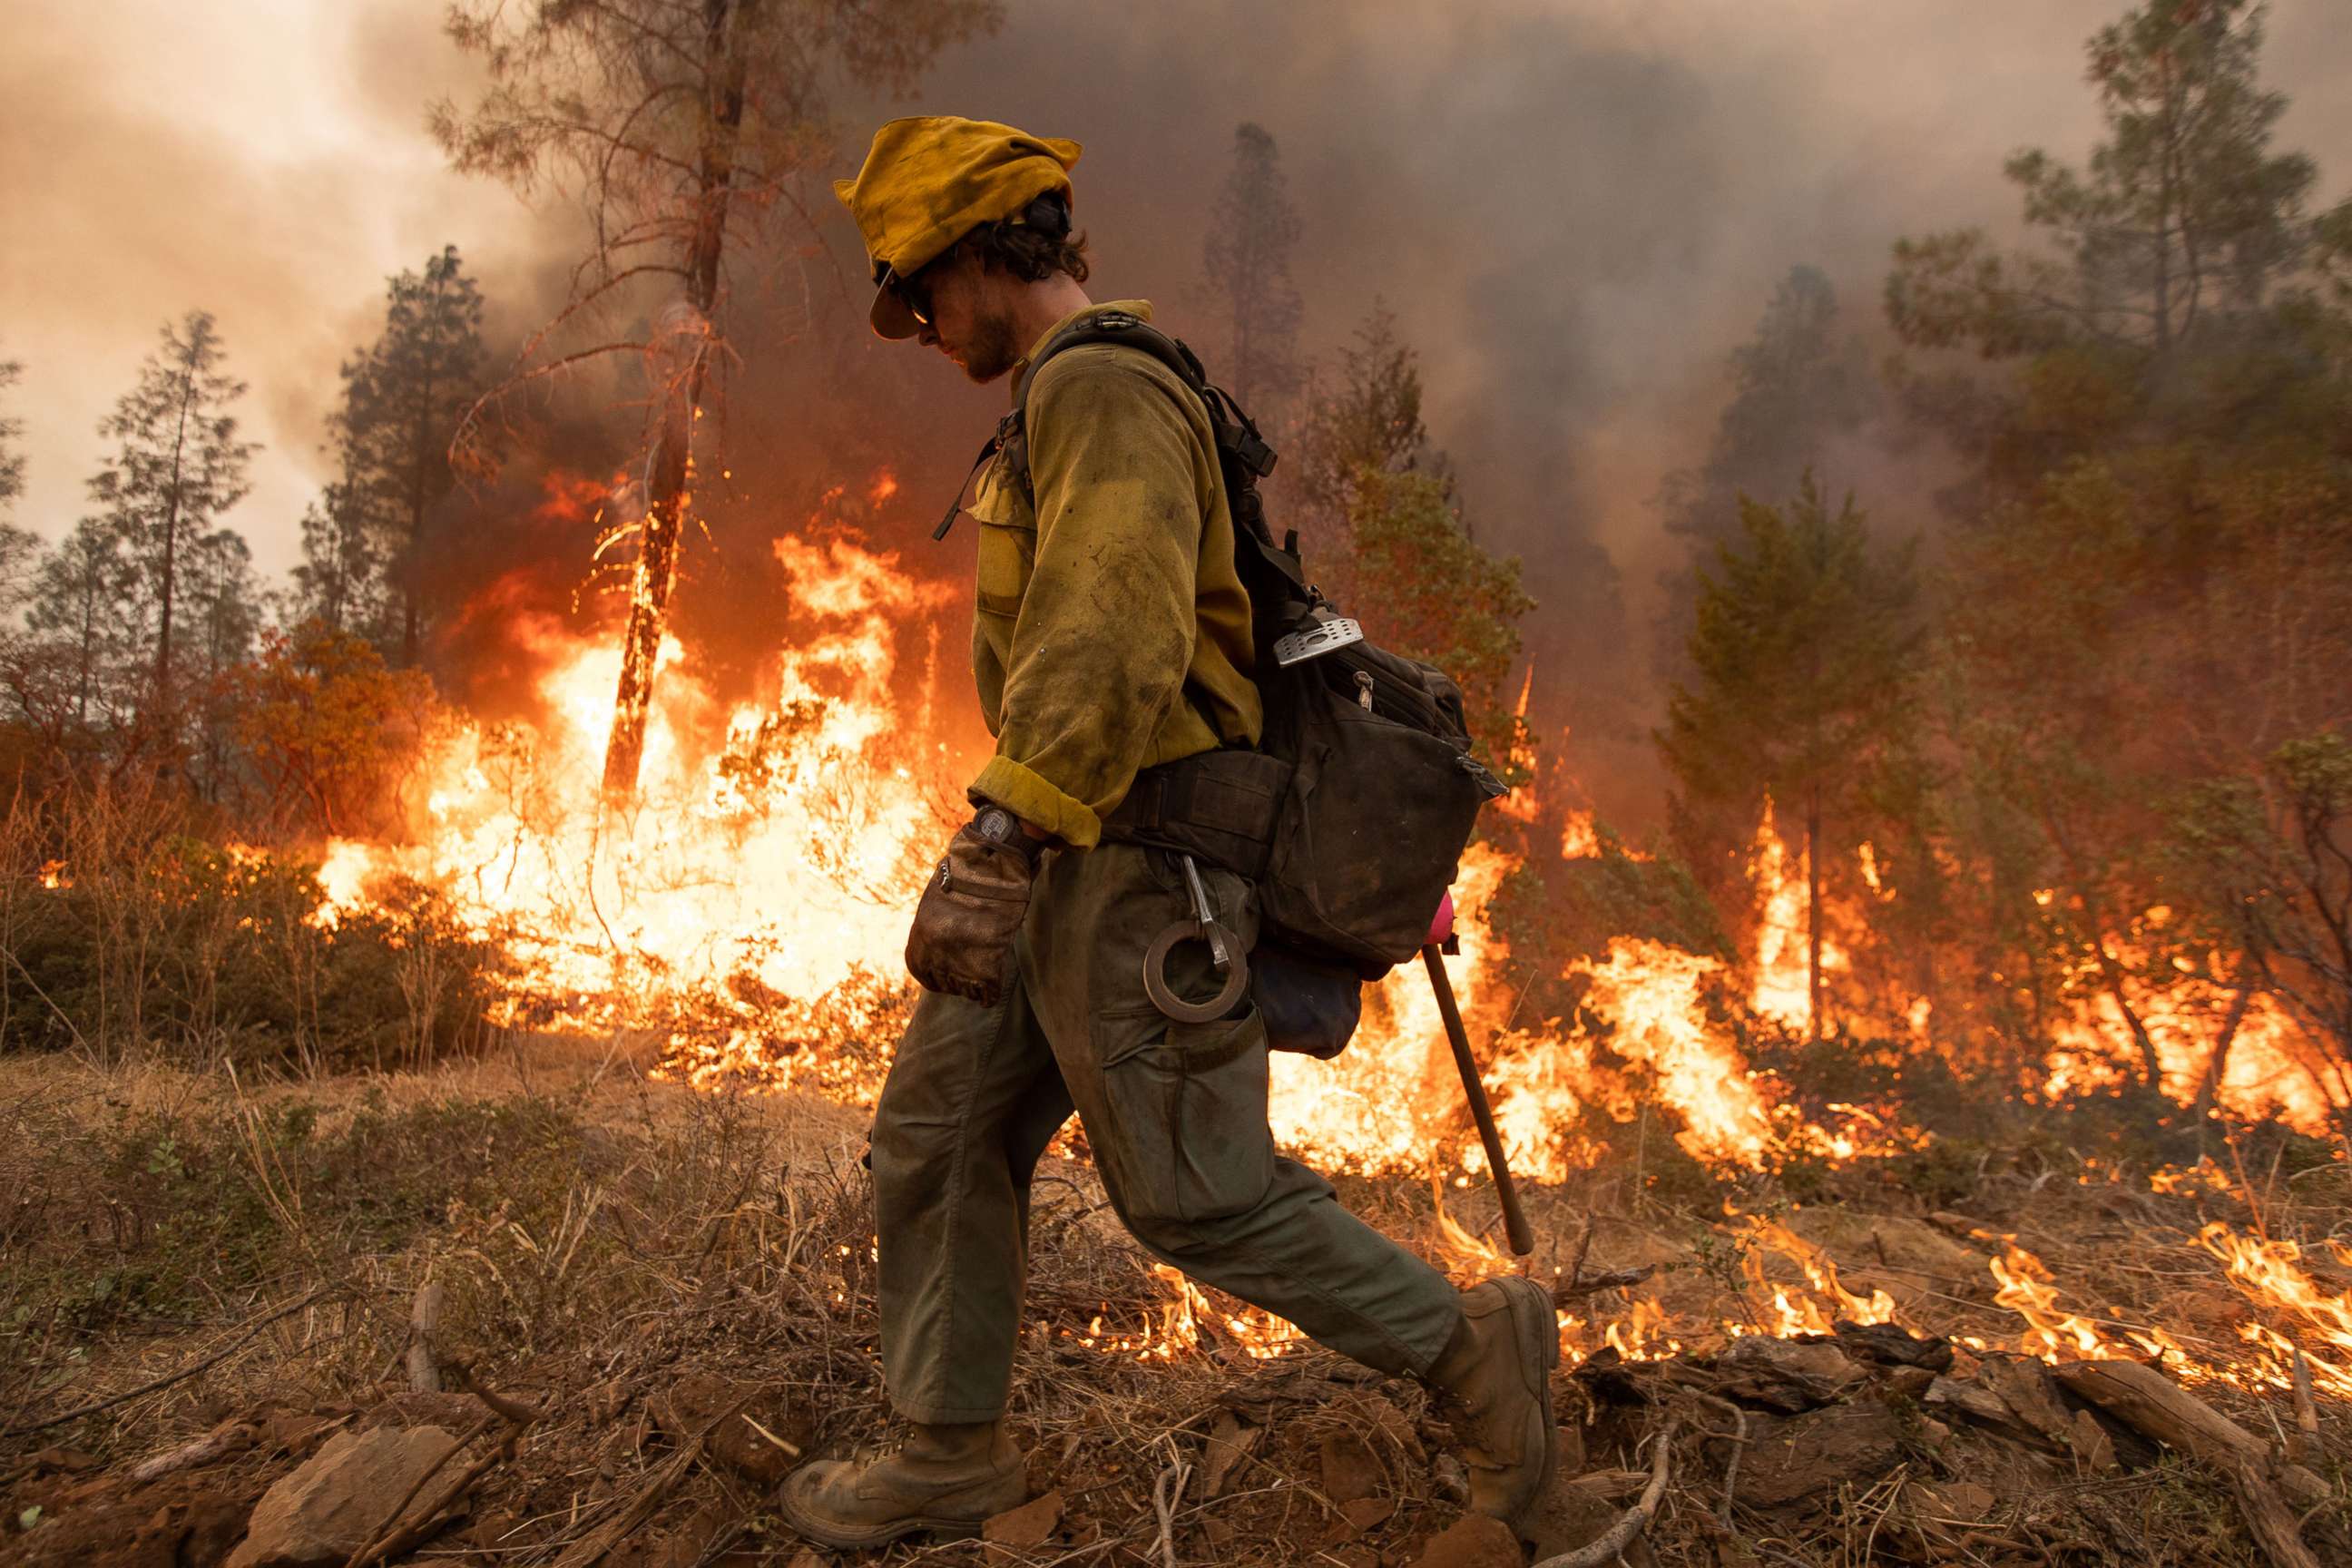 PHOTO: A firefighter uses a drip torch during the Mosquito fire near Volcanoville, Calif., on Sept. 9, 2022.